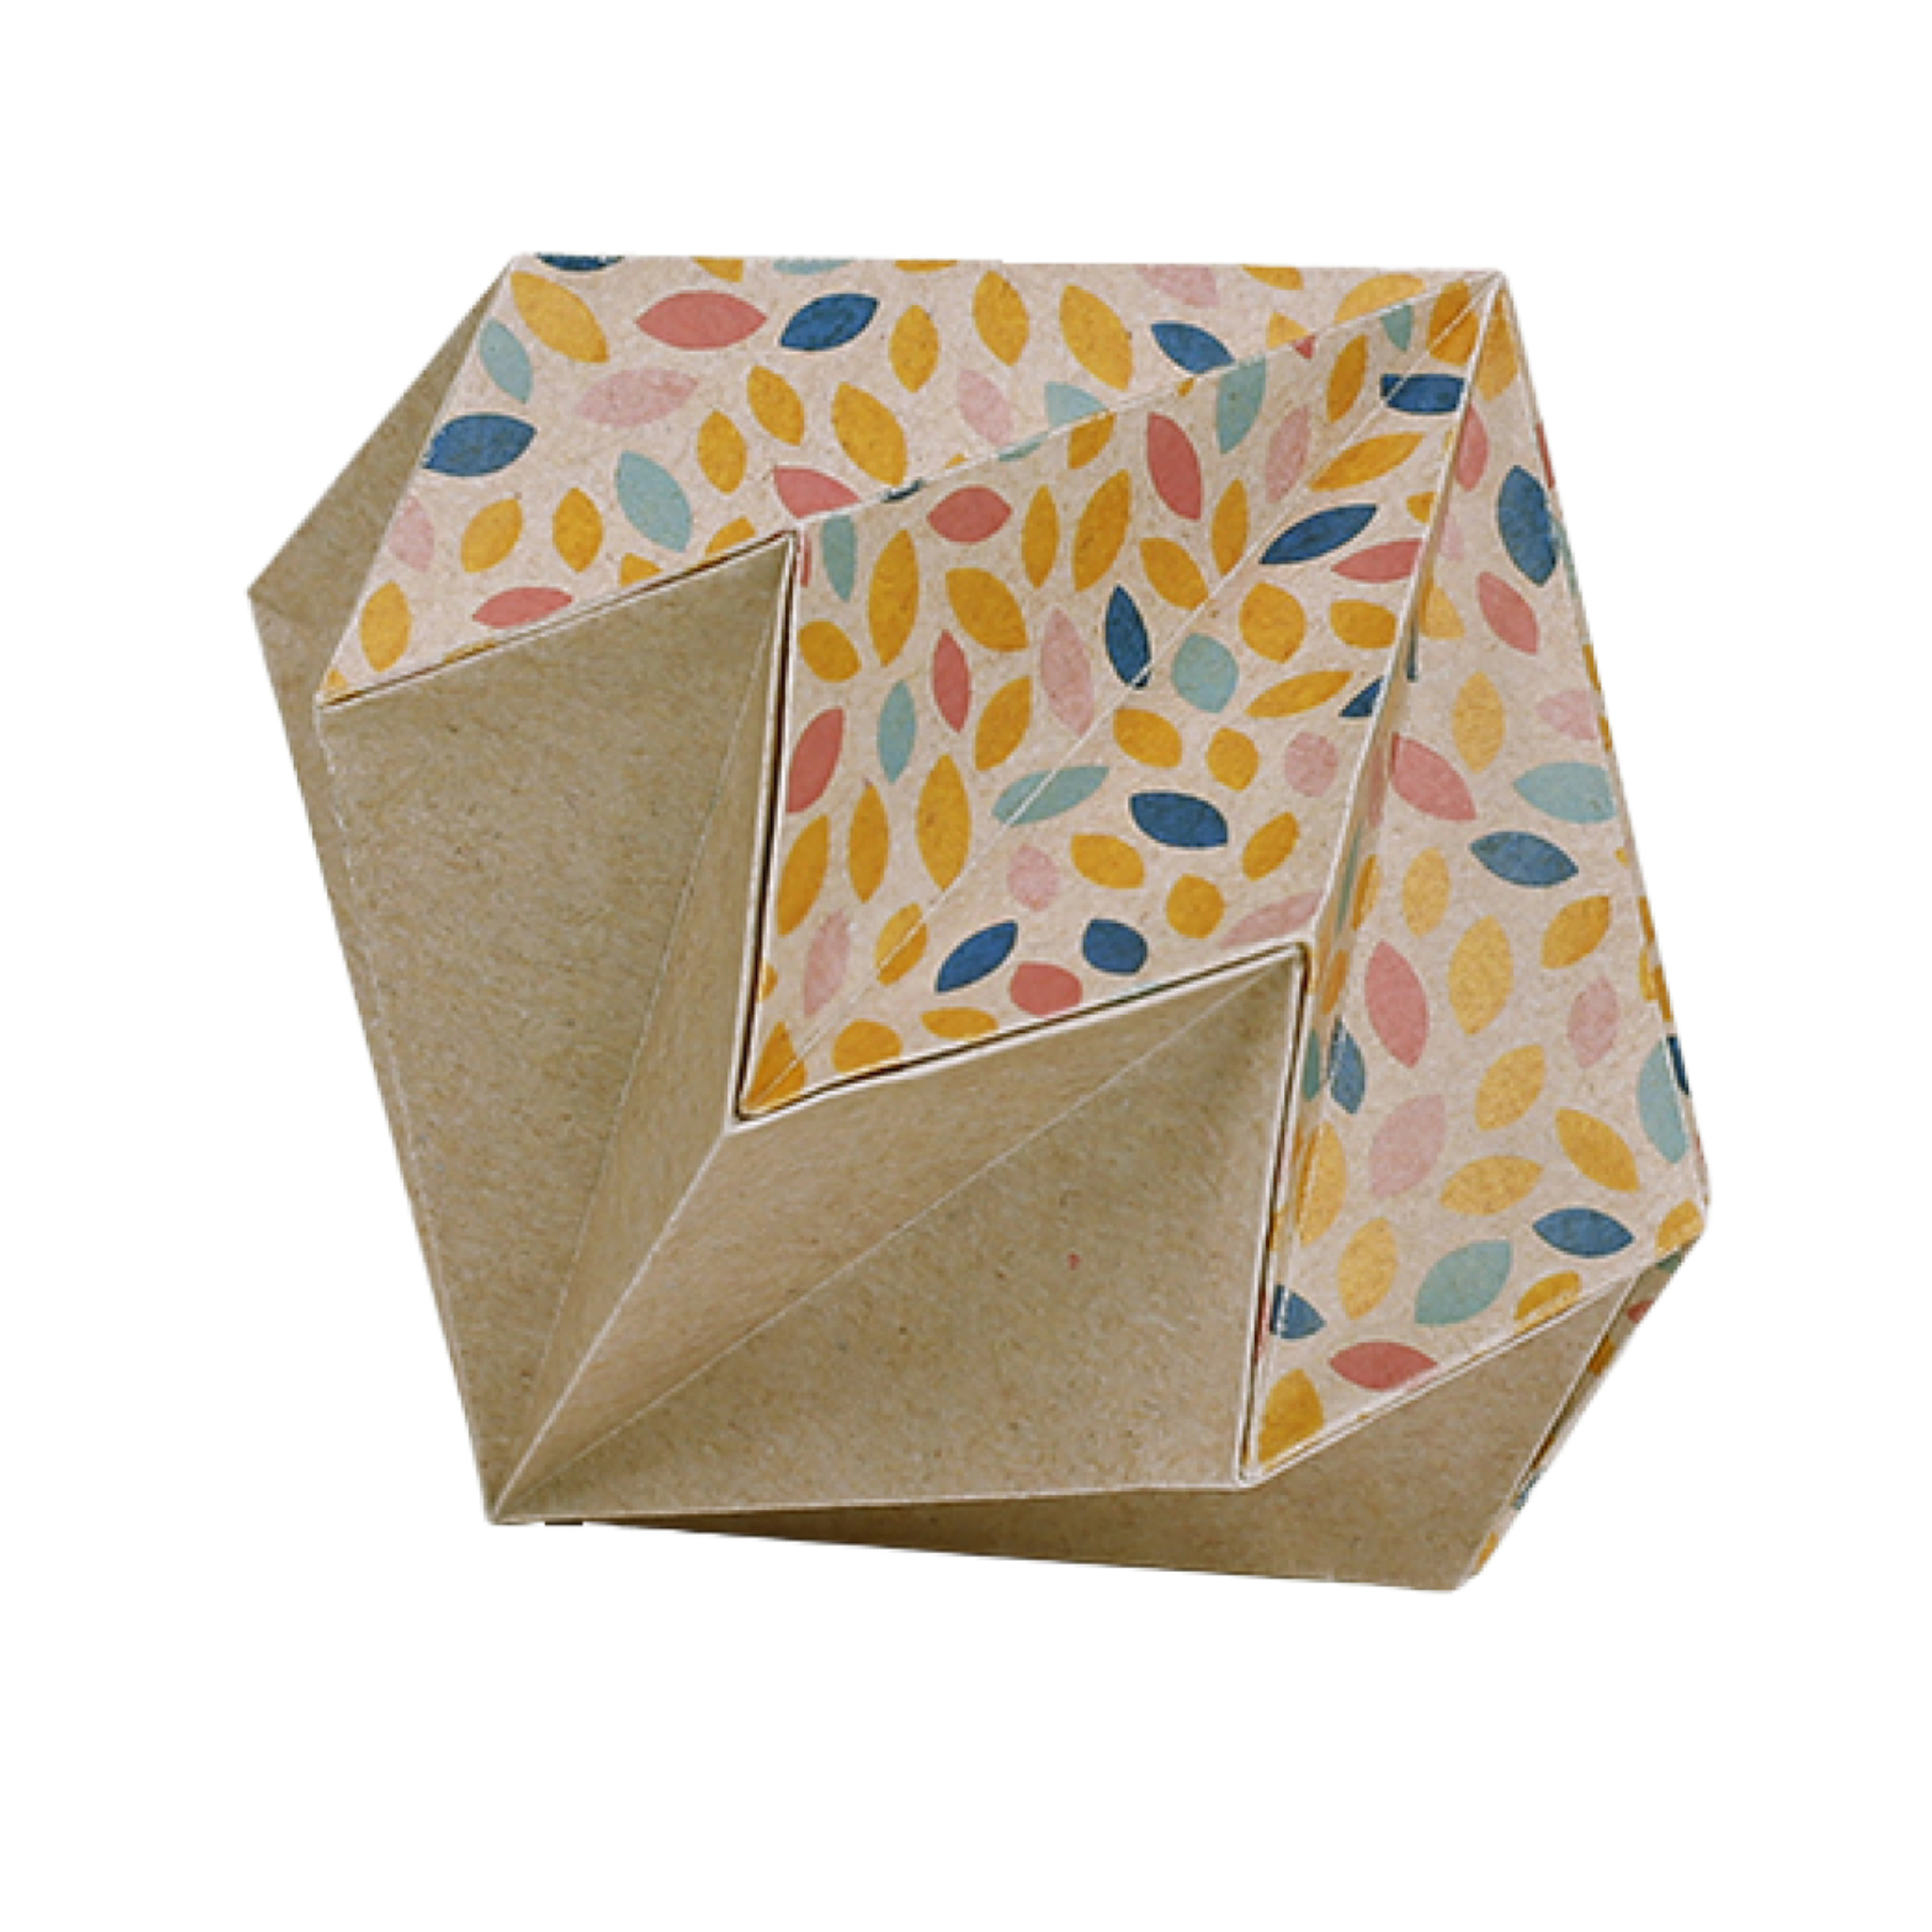 Papel Origami Krafty Color clairefontaine